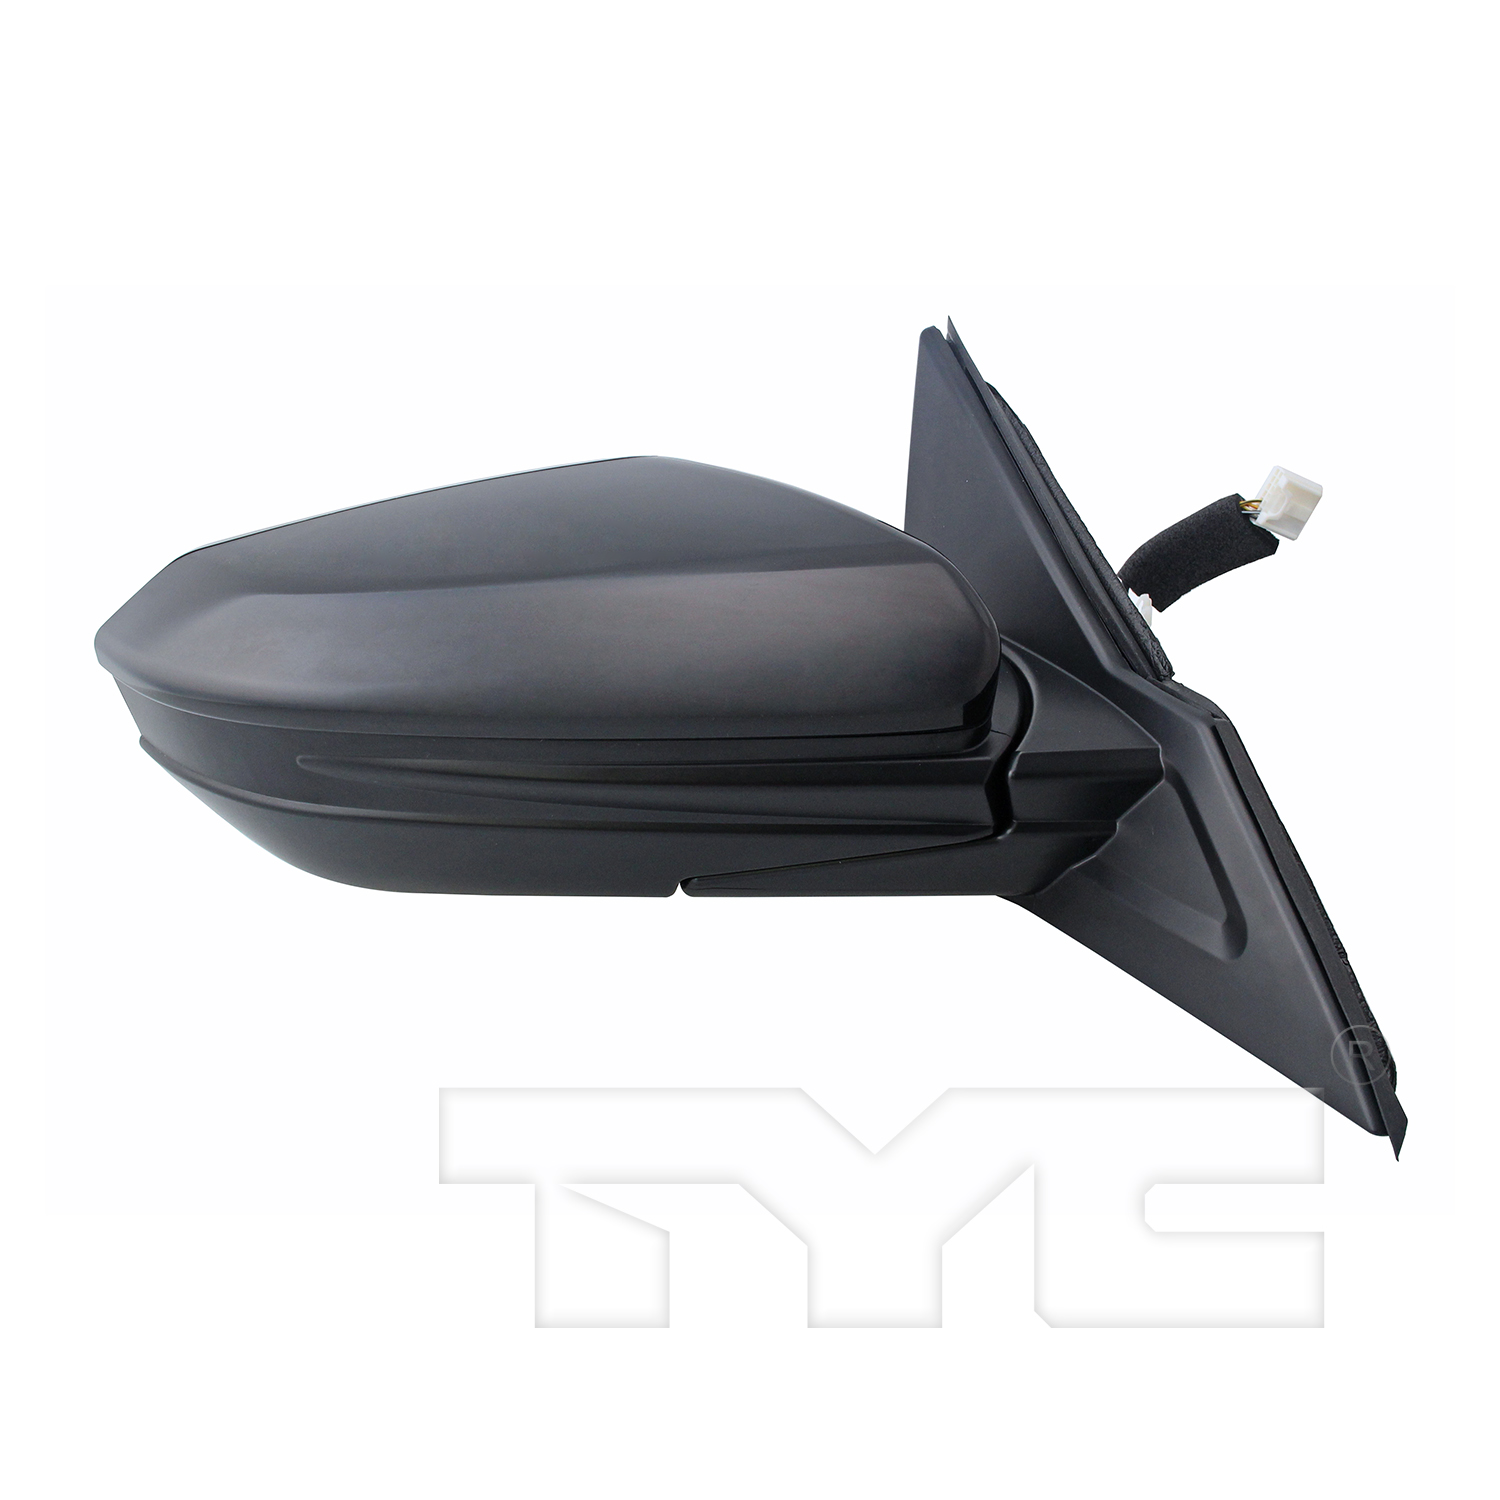 Aftermarket MIRRORS for HONDA - CIVIC, CIVIC,16-16,RT Mirror outside rear view